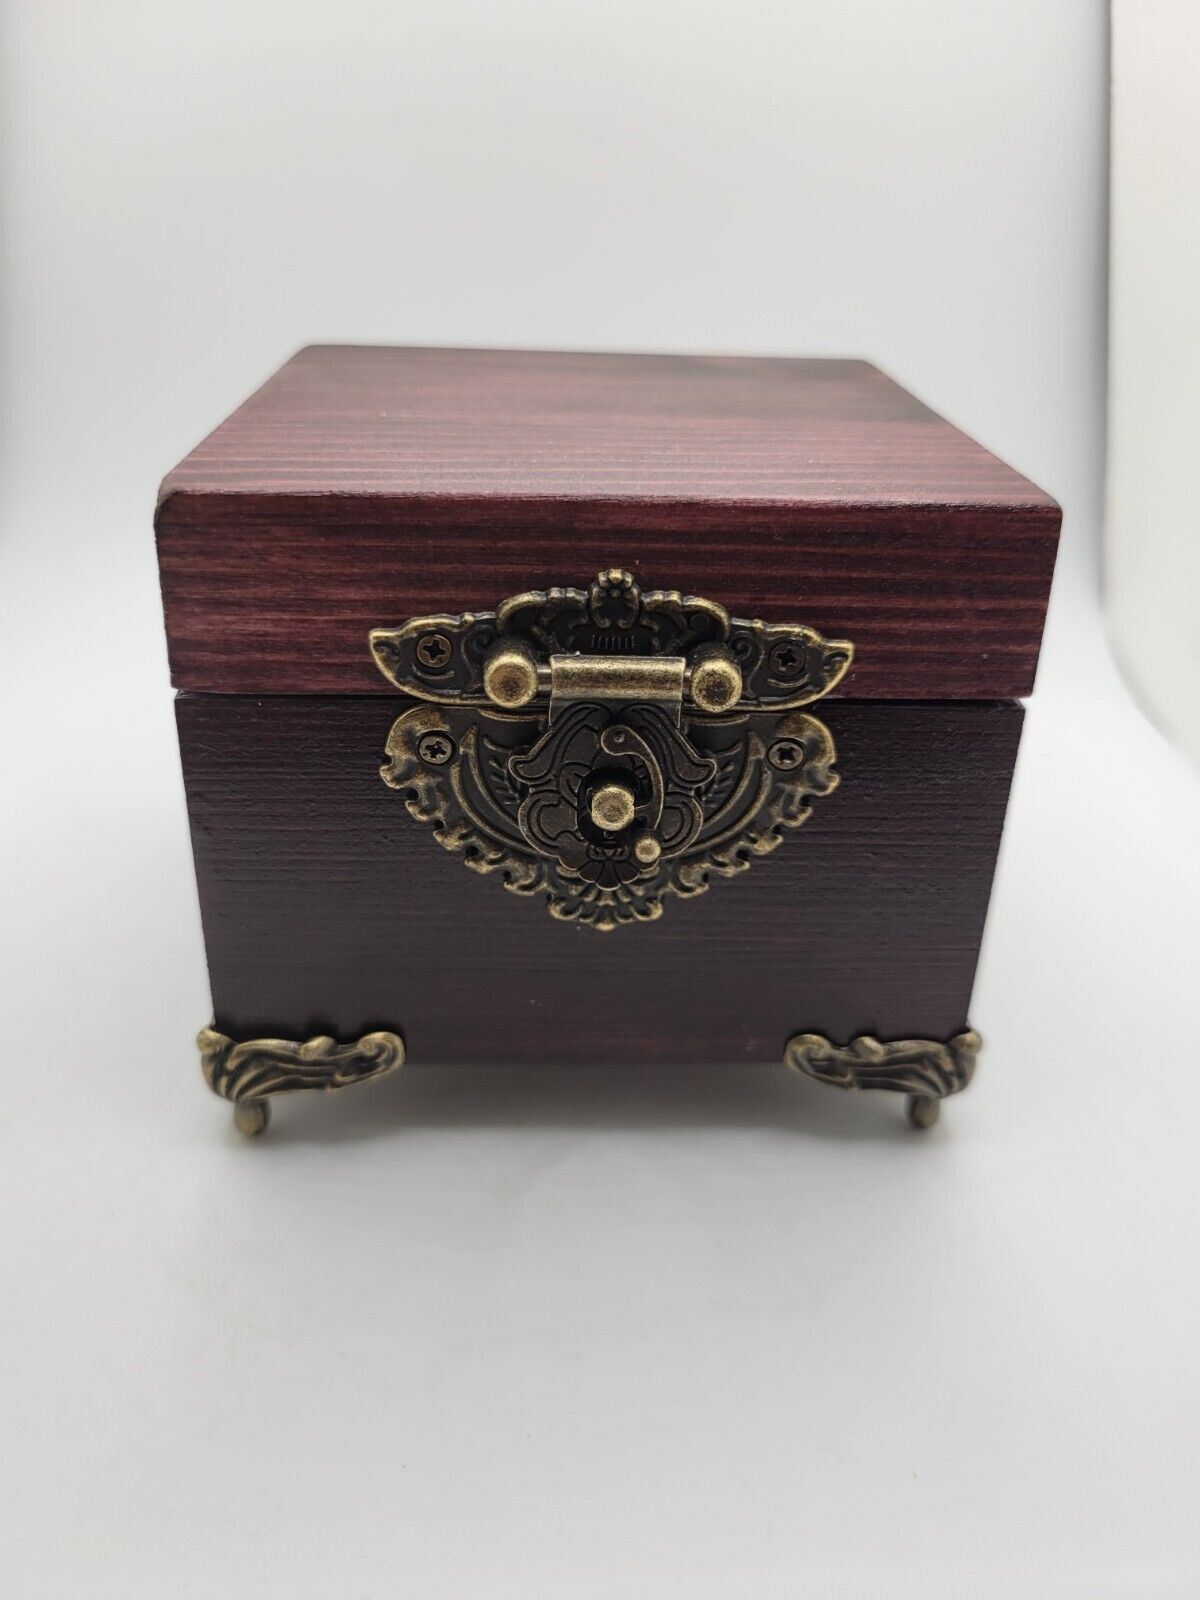 Vintage Wooden Jewelry Storage Box With Ornate Bronze Metal Accents